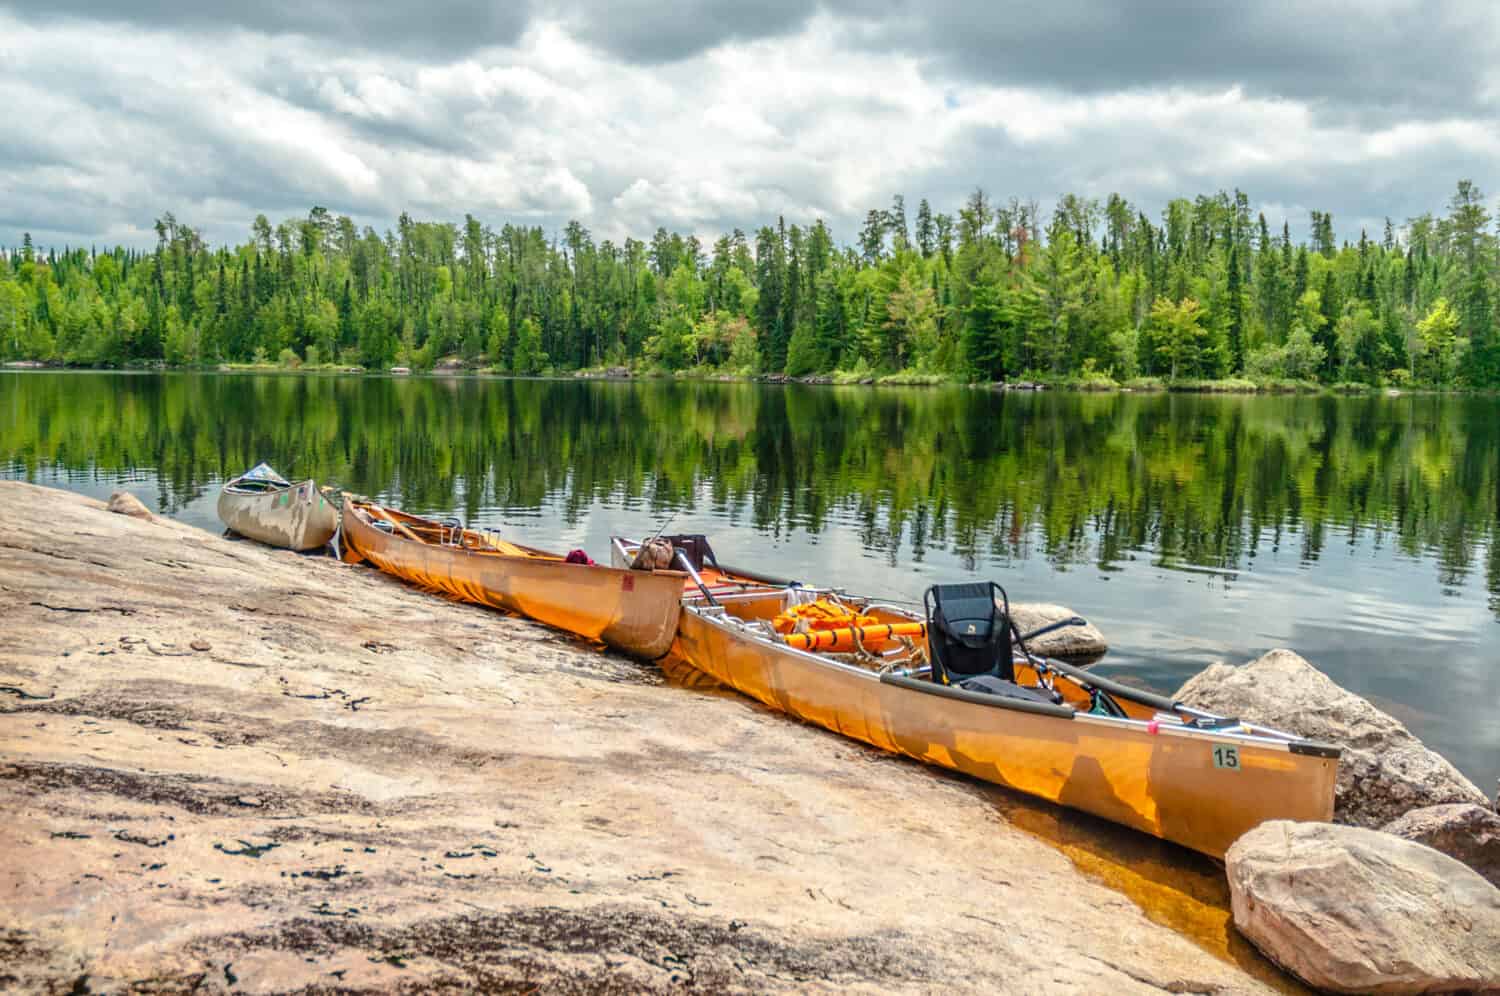 Three canoes line a rocky shore made of igneous rocks in the Boundary Waters Canoe area in the North Woods of Minnesota with beautiful green trees reflecting in the lake behind.